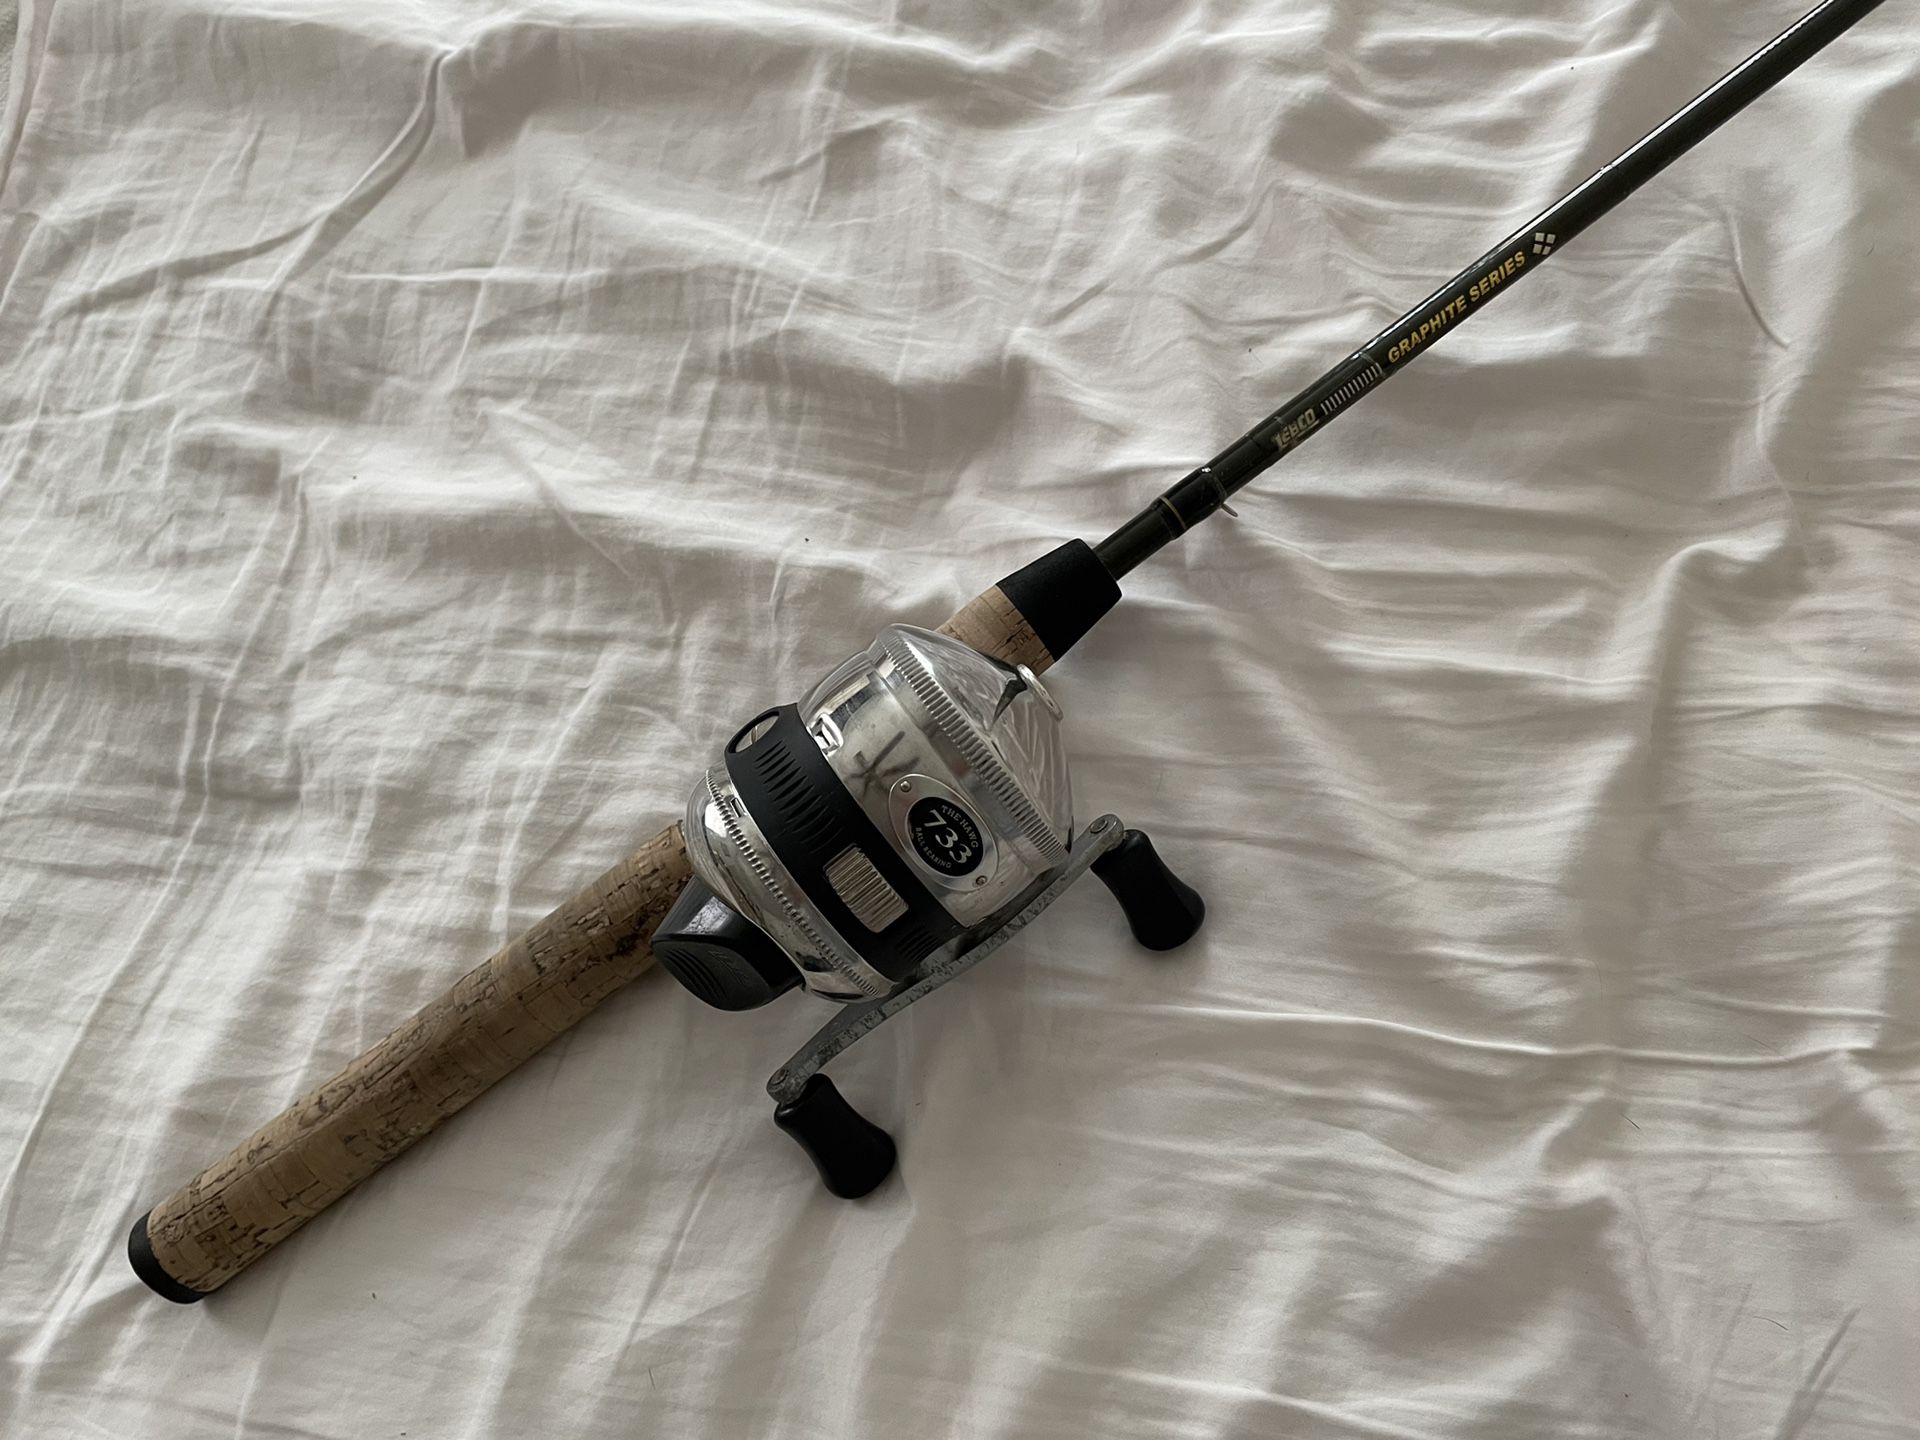 Zebco 733 Hawg Spin cast Combo for Sale in Midlothian, VA - OfferUp